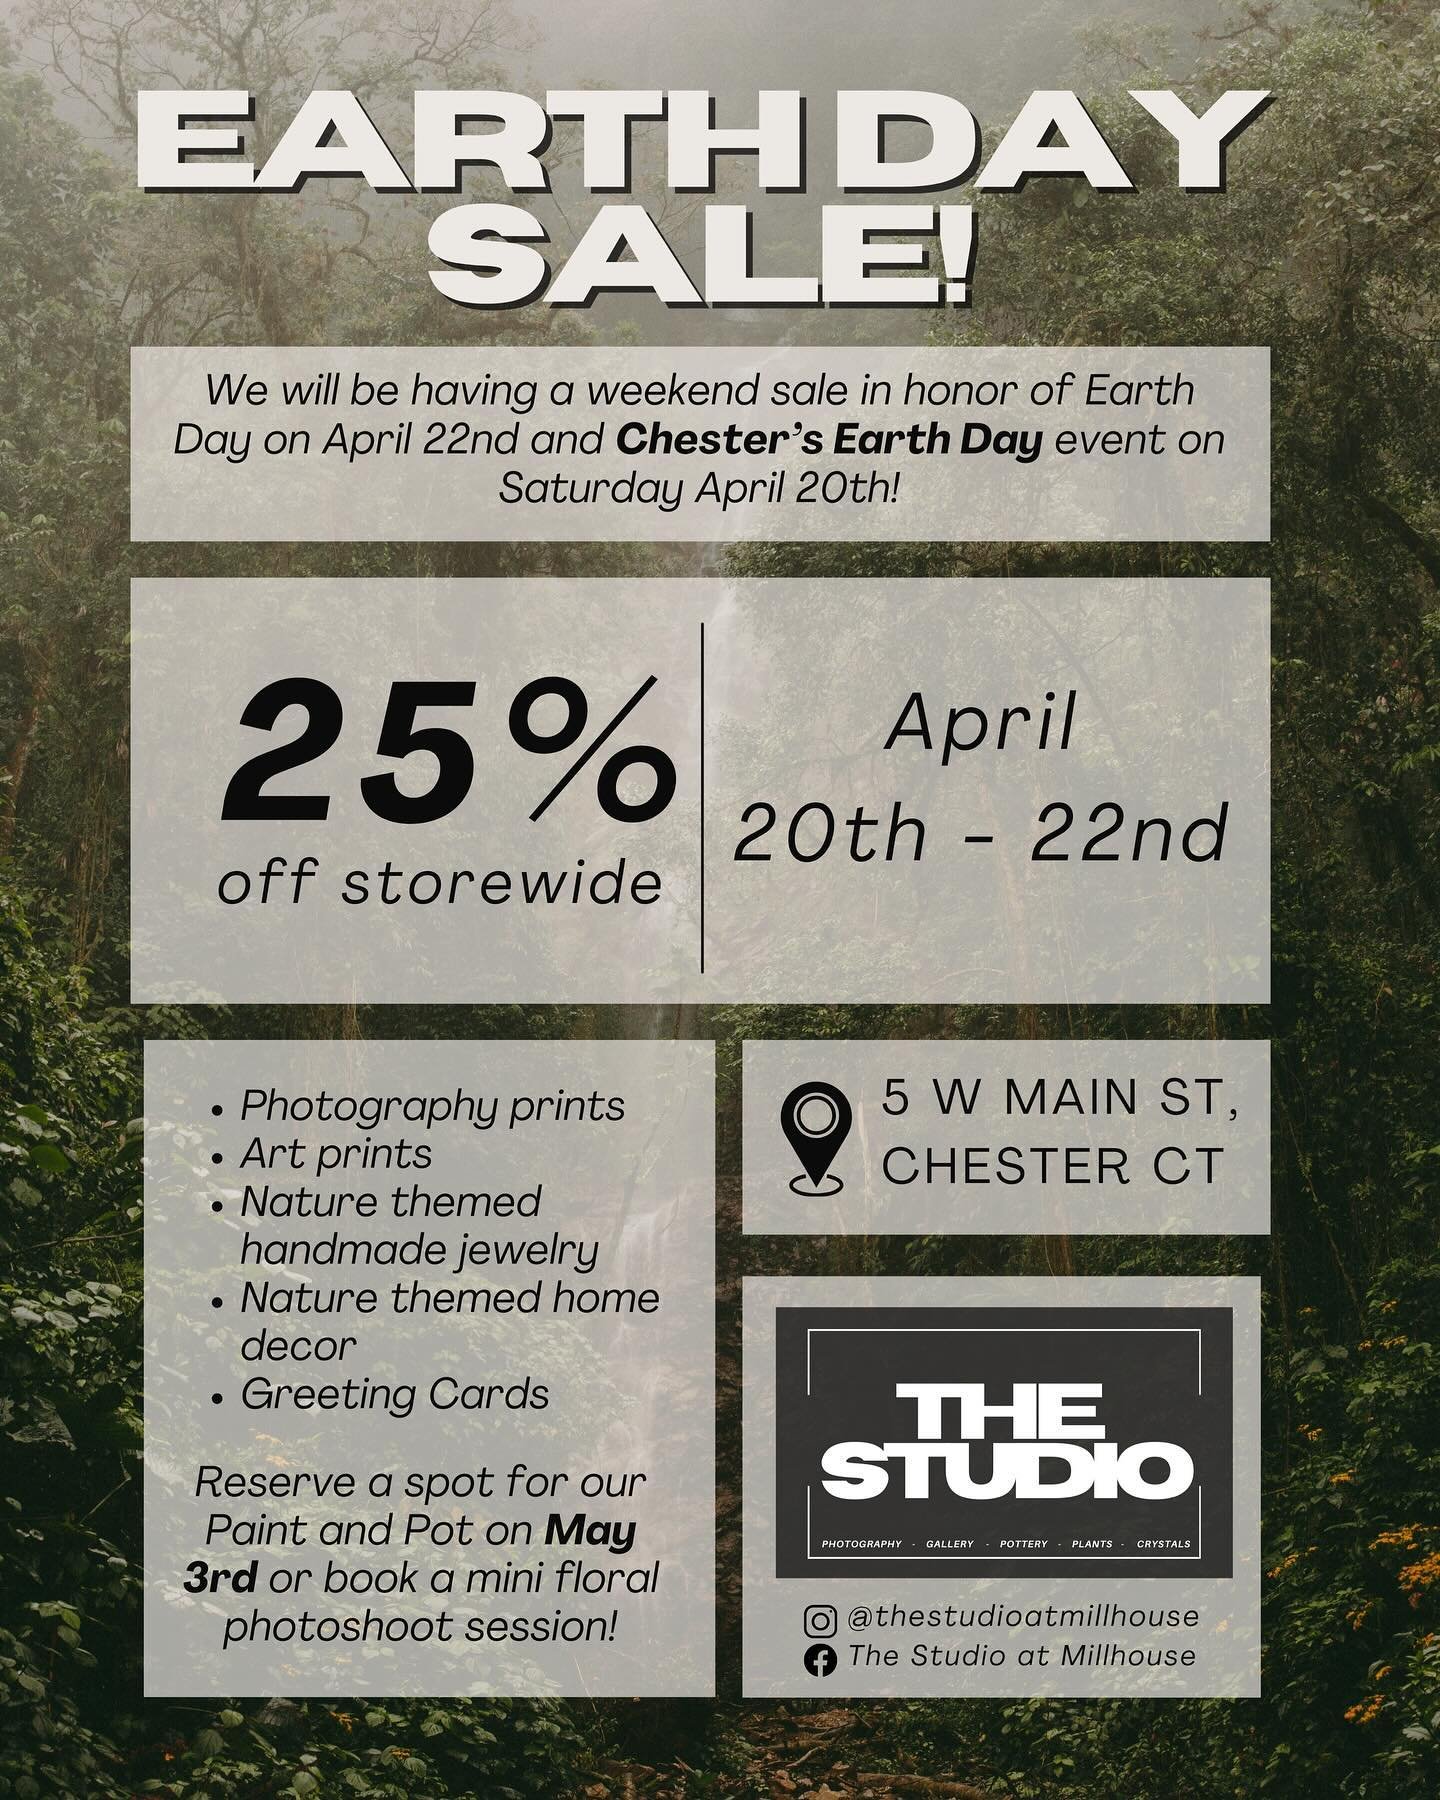 Mark your calendars for Earth Day tomorrow!! We&rsquo;ll be doing a 25% off sale in honor of 4/20 and Chester&rsquo;s Earth Day event! 🌍

Celebrate by getting yourself a photography print or some nature themed home decor! We&rsquo;ll be open 10-6 Sa